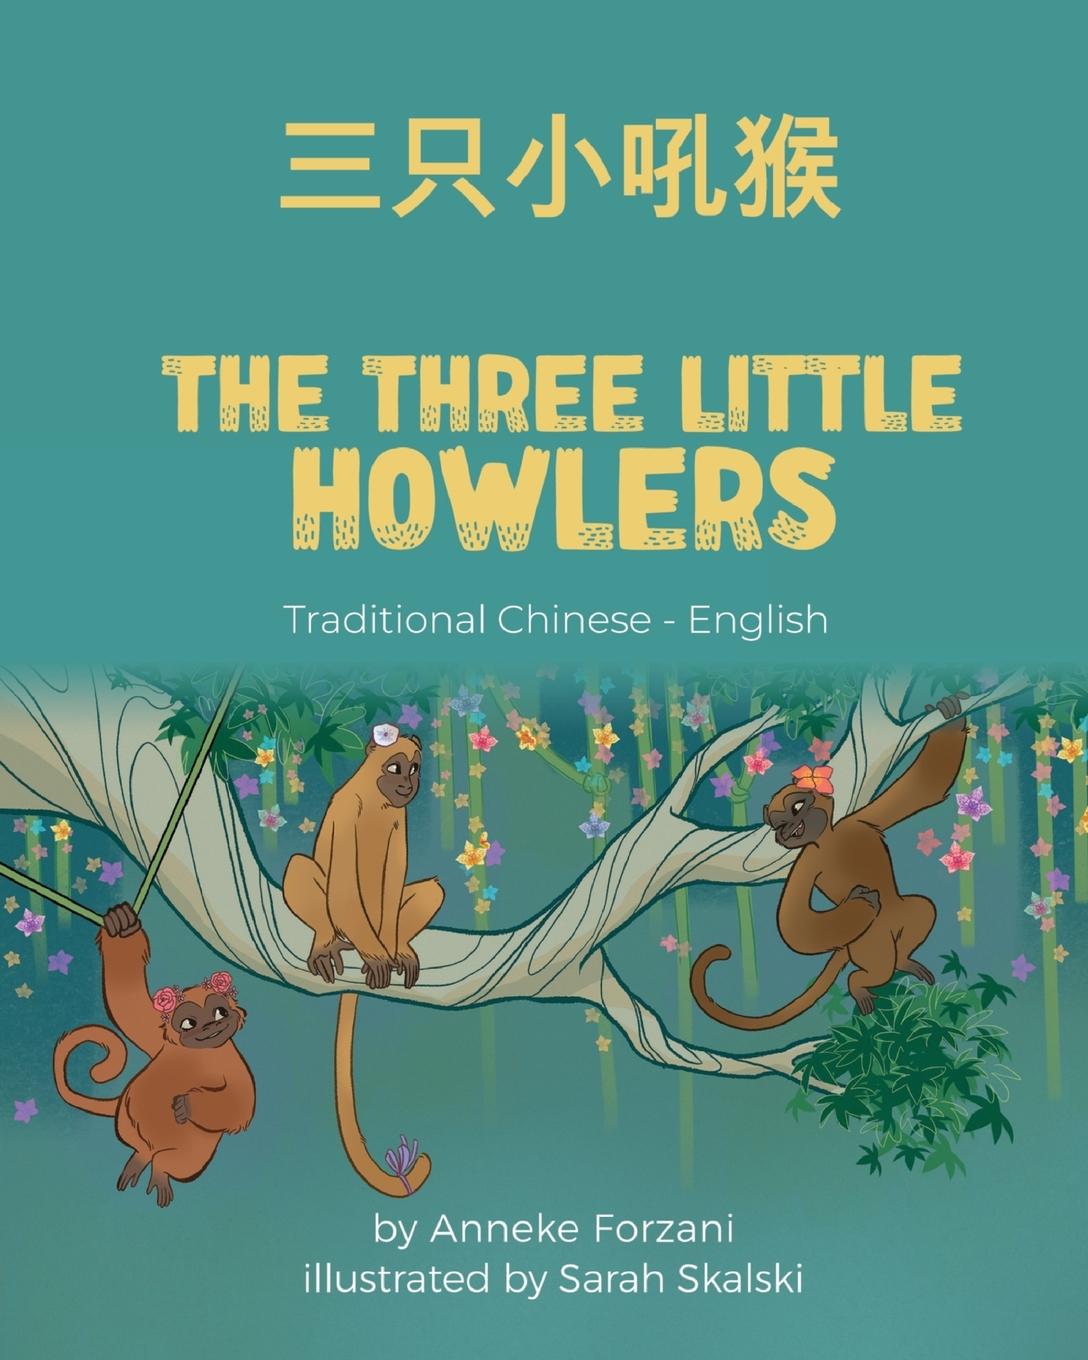 Book The Three Little Howlers (Traditional Chinese-English) 